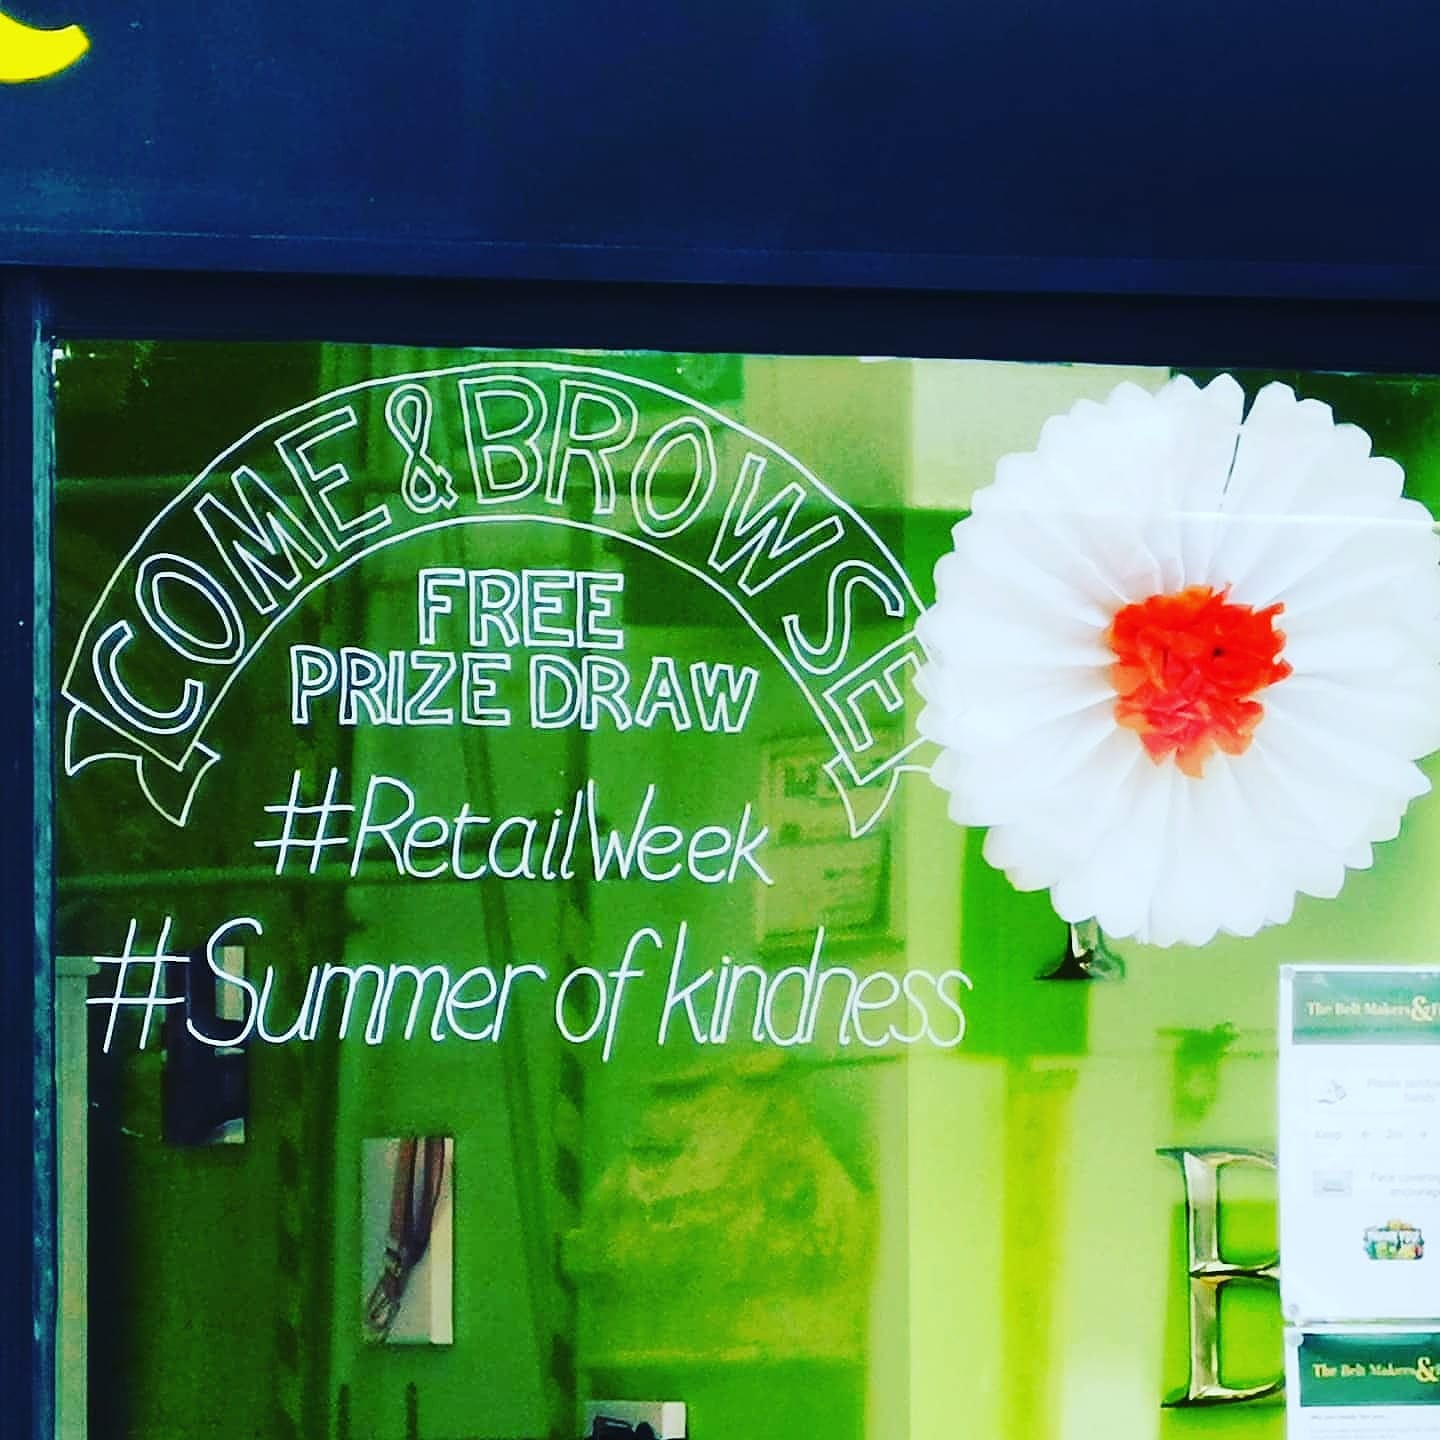 Close up of our shop window with handwritten chalk pen banner stating Come & Browse, Free Prize Draw, #RetailWeek, #SummerofKindness